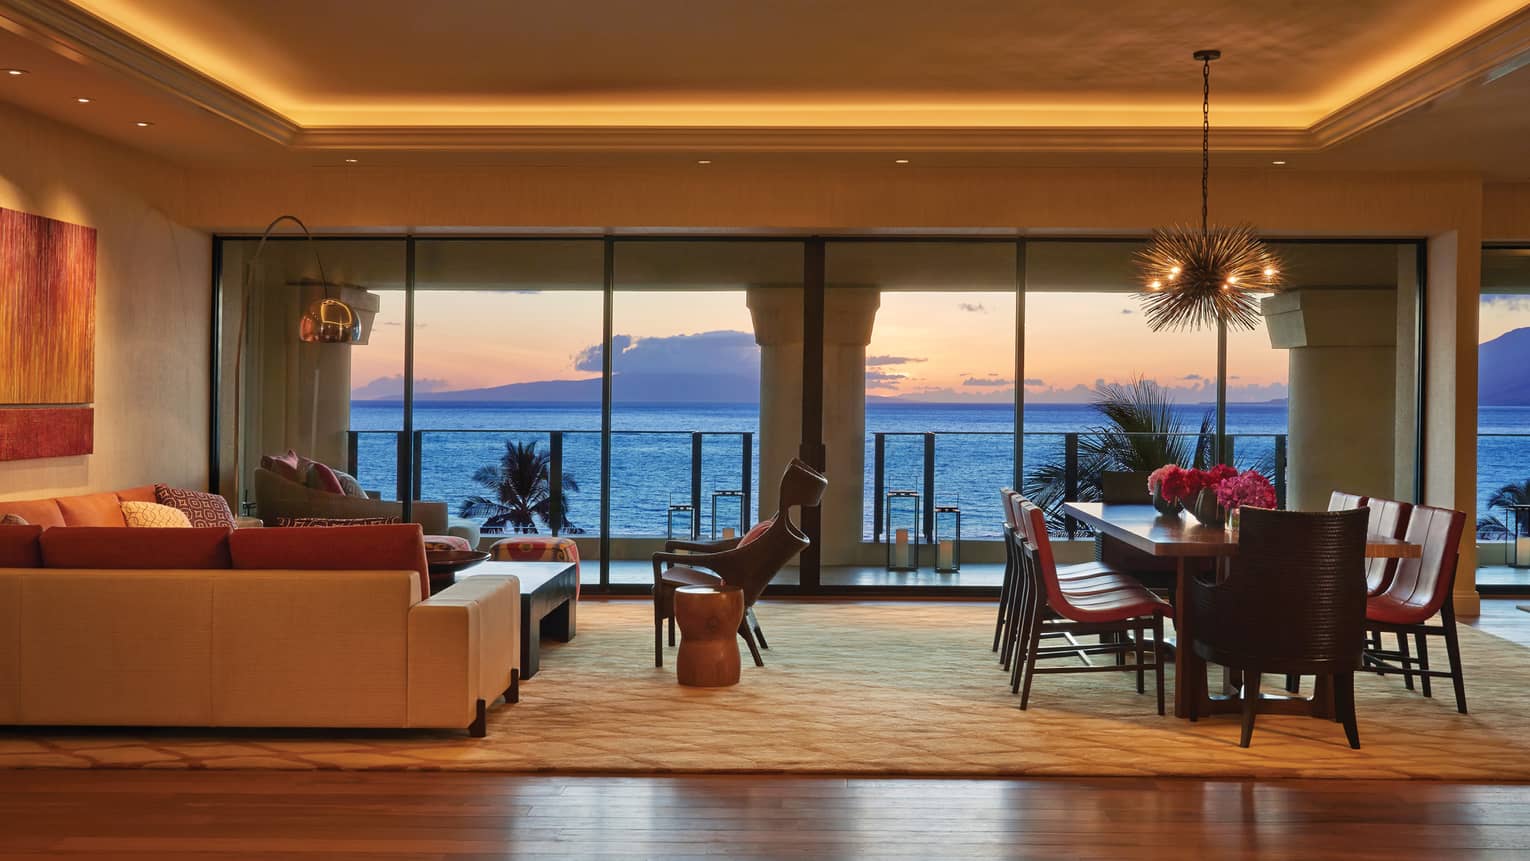 Maile Suite living area with beige and rust sectional, dining set, vaulted lit ceiling, ocean views out tall windows at sunset